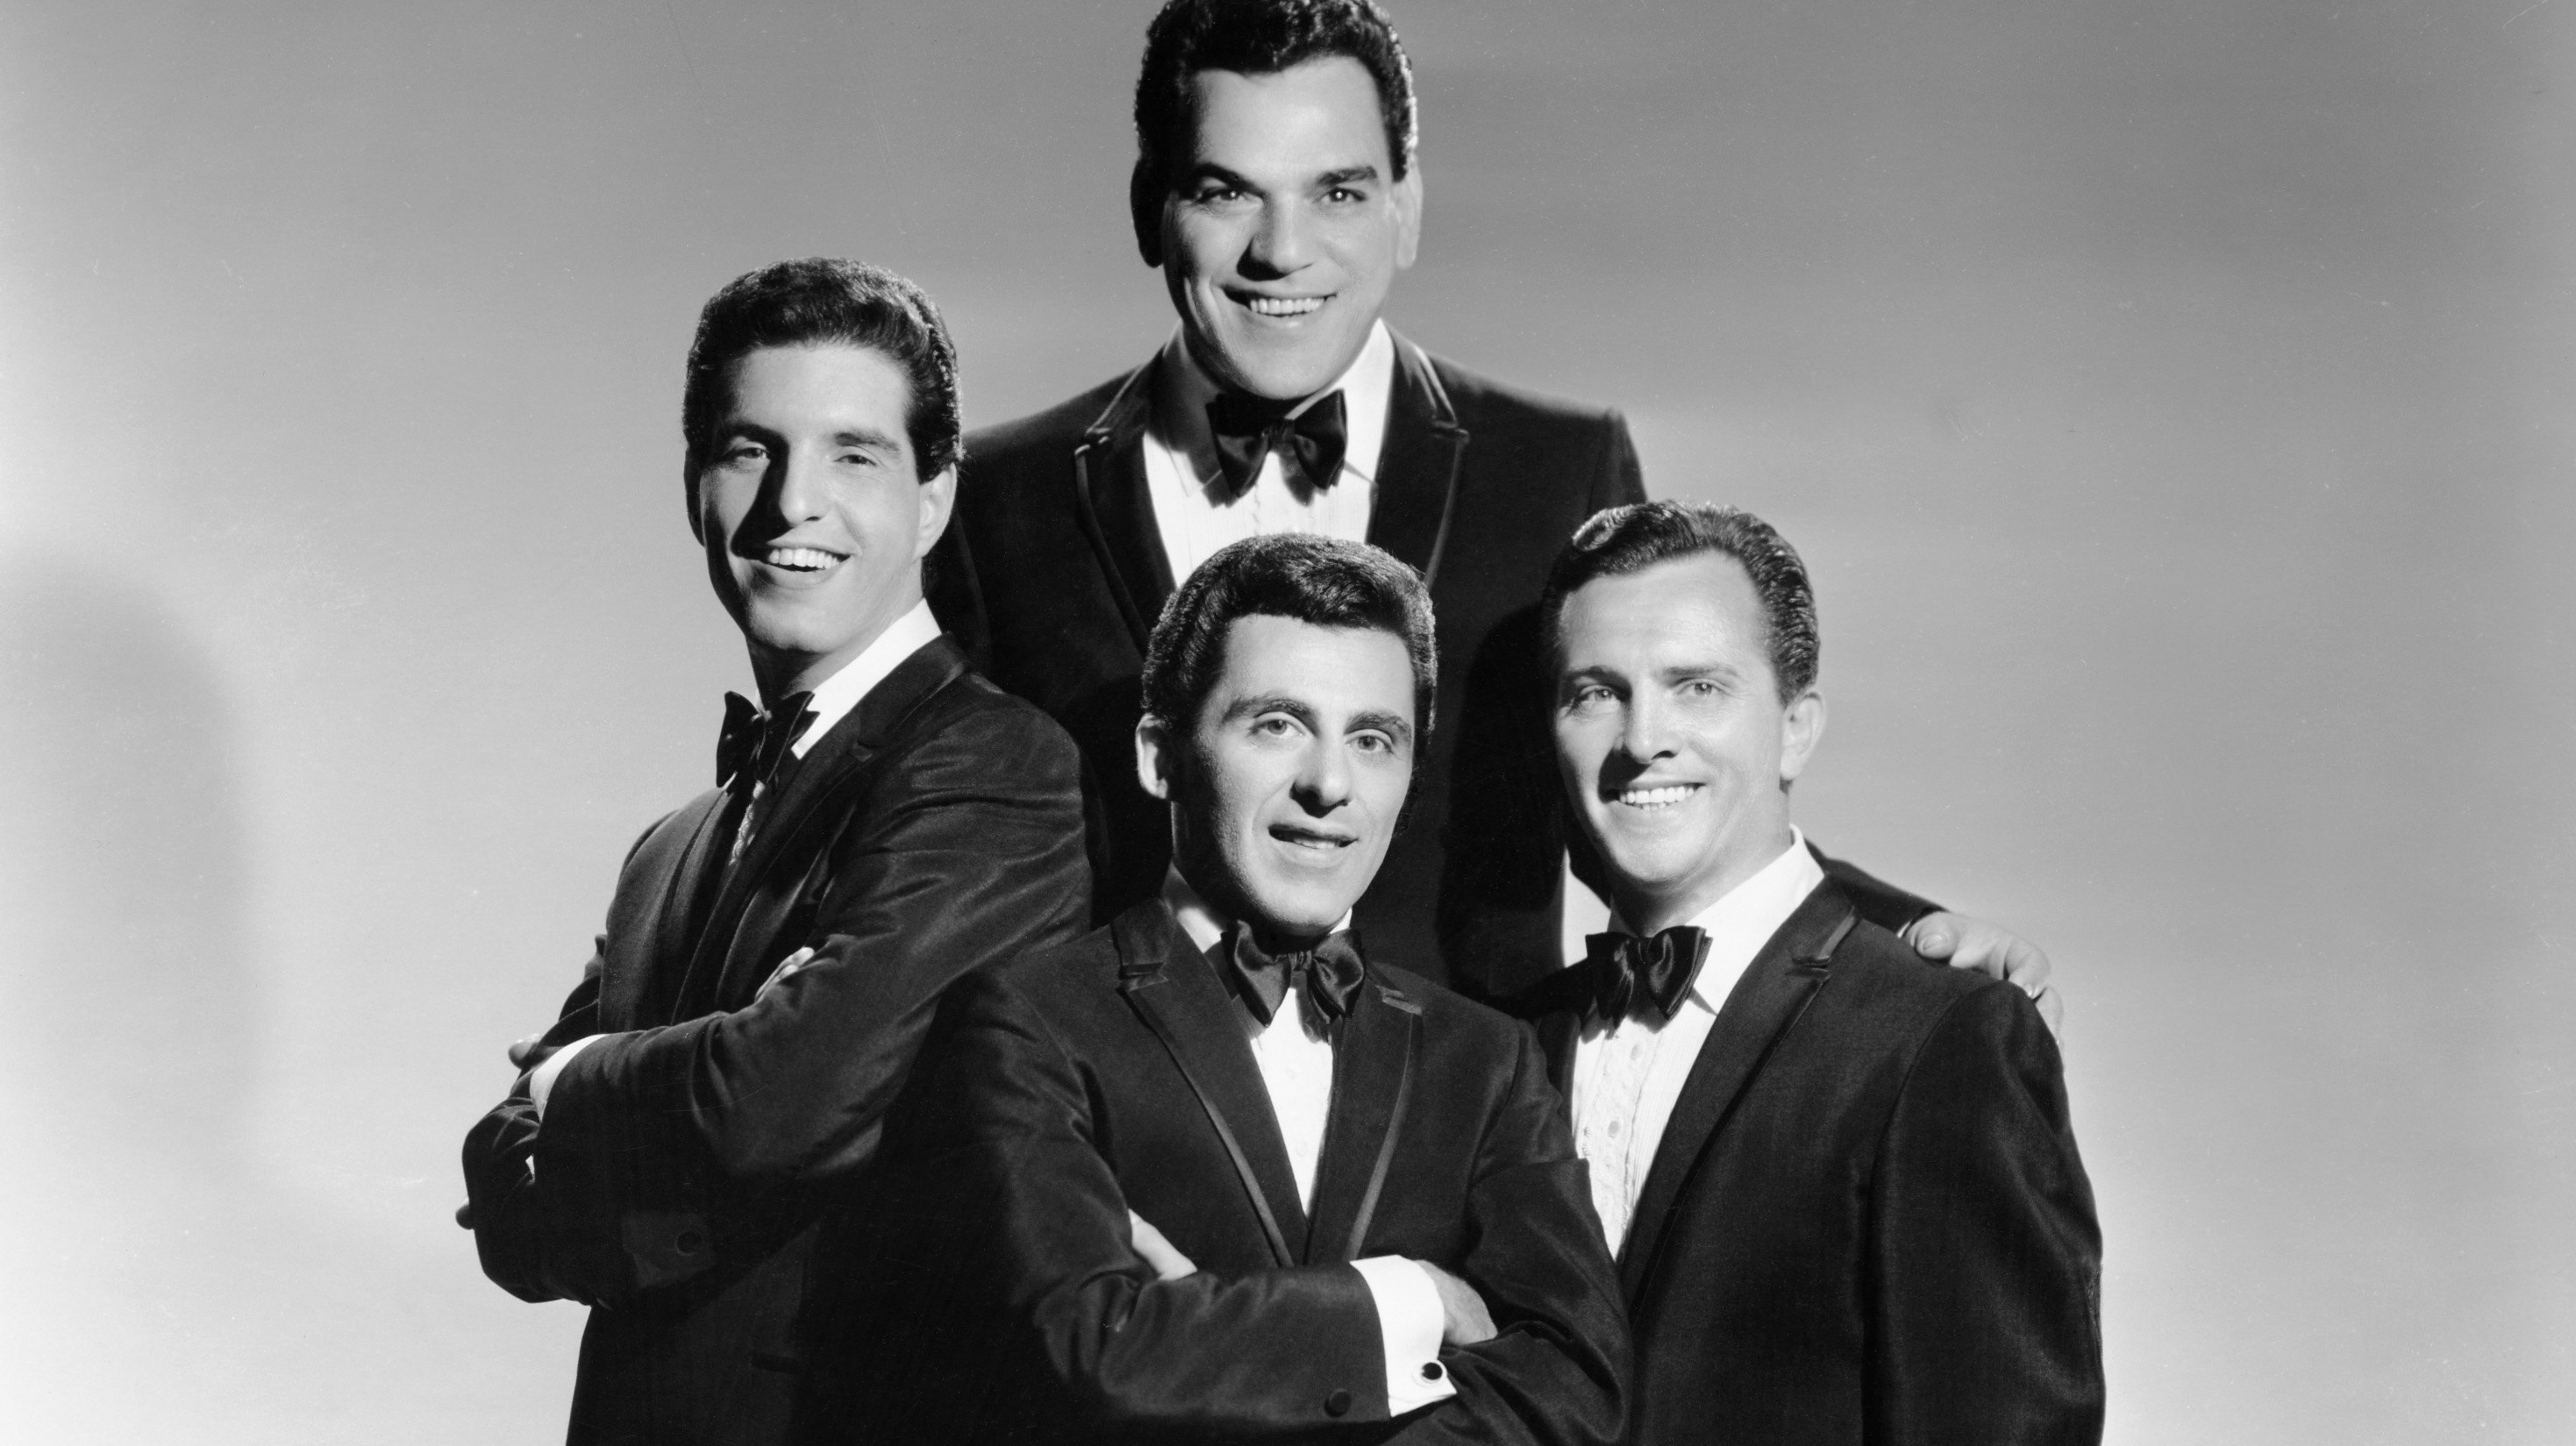 frankie valli and the four seasons broadway